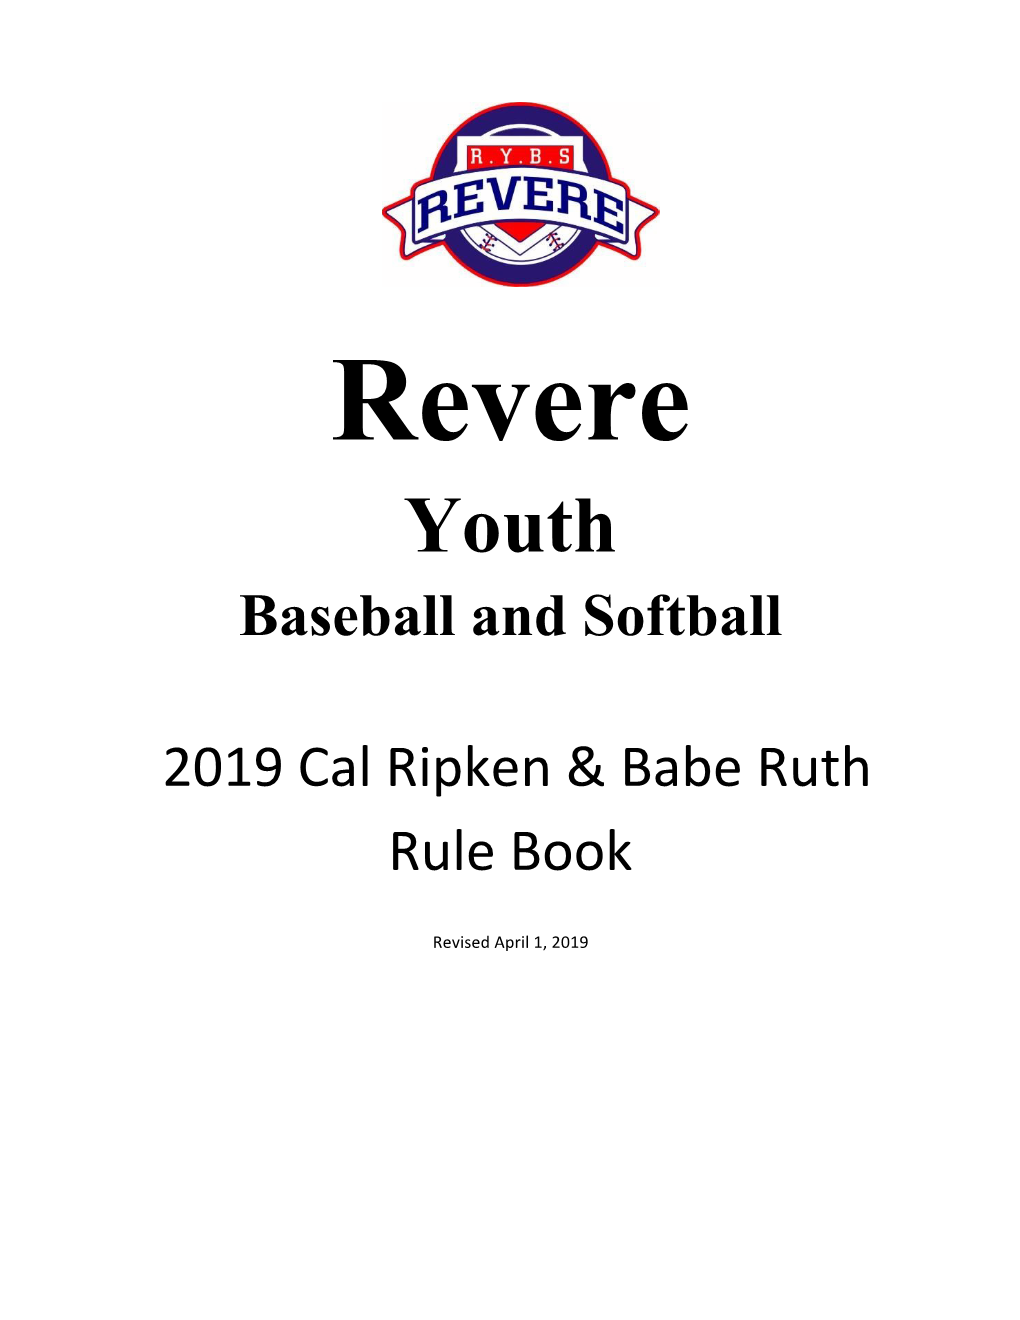 Revere Youth Baseball and Softball Page 2